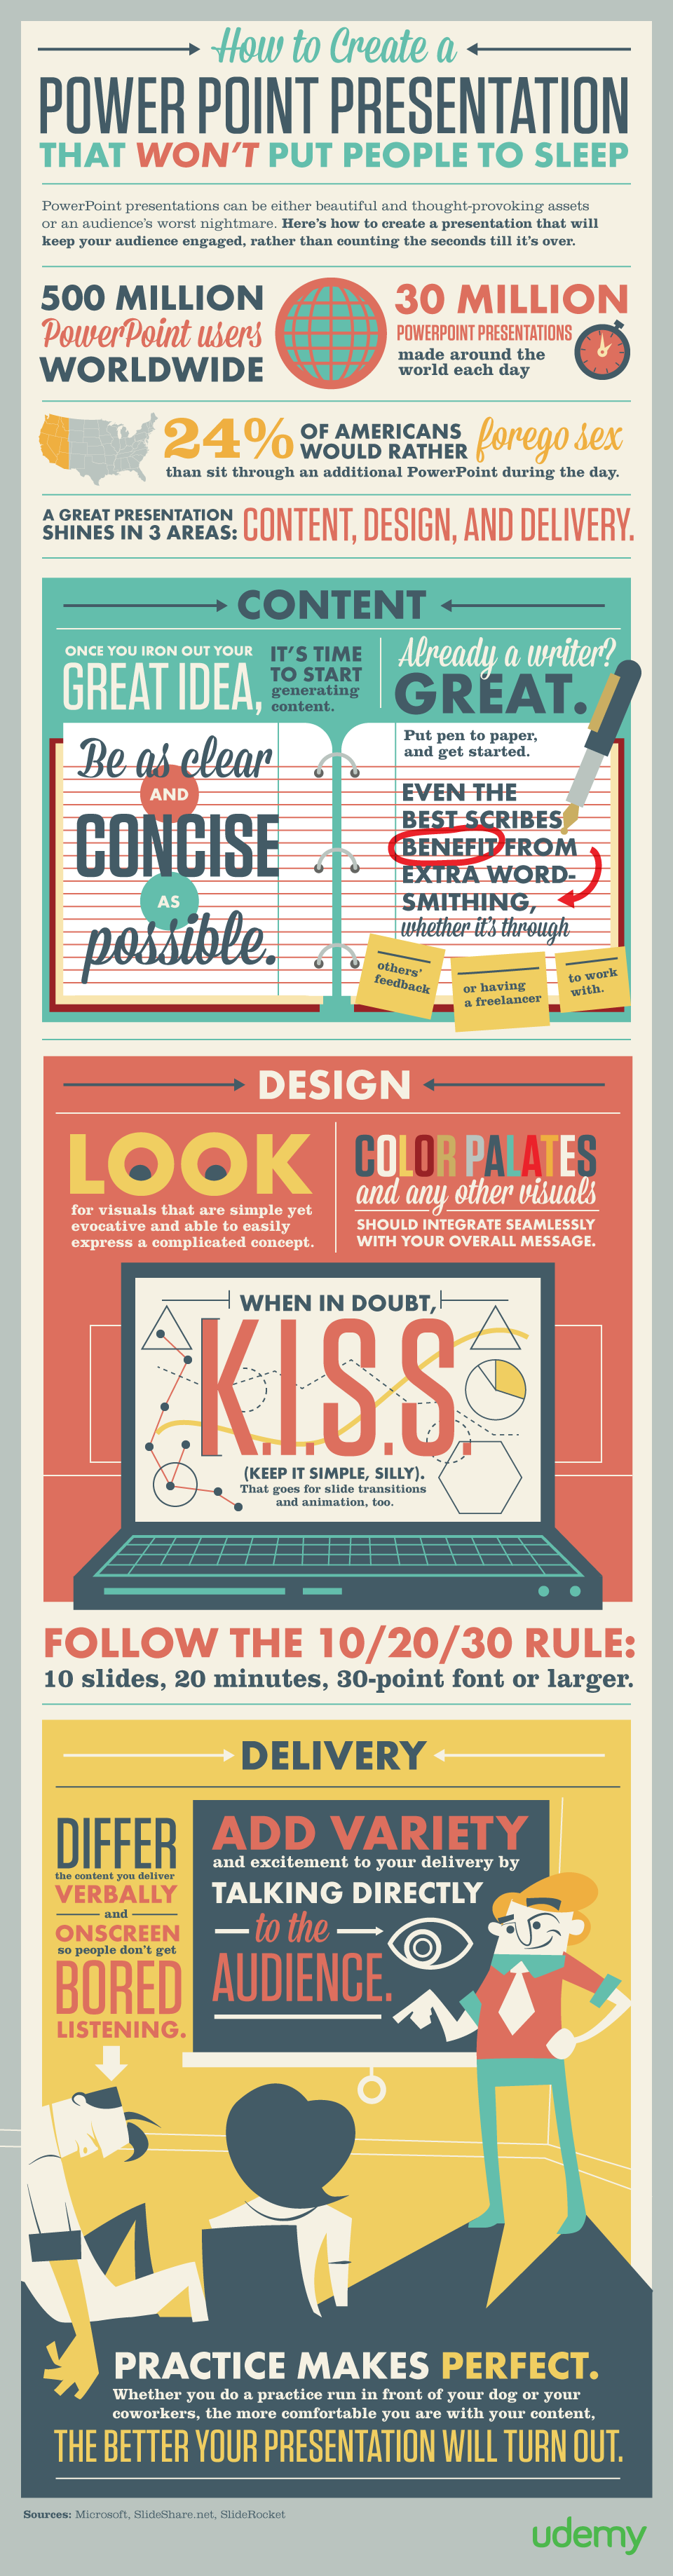 Infographic on how to make a PowerPoint that won't put people to sleep